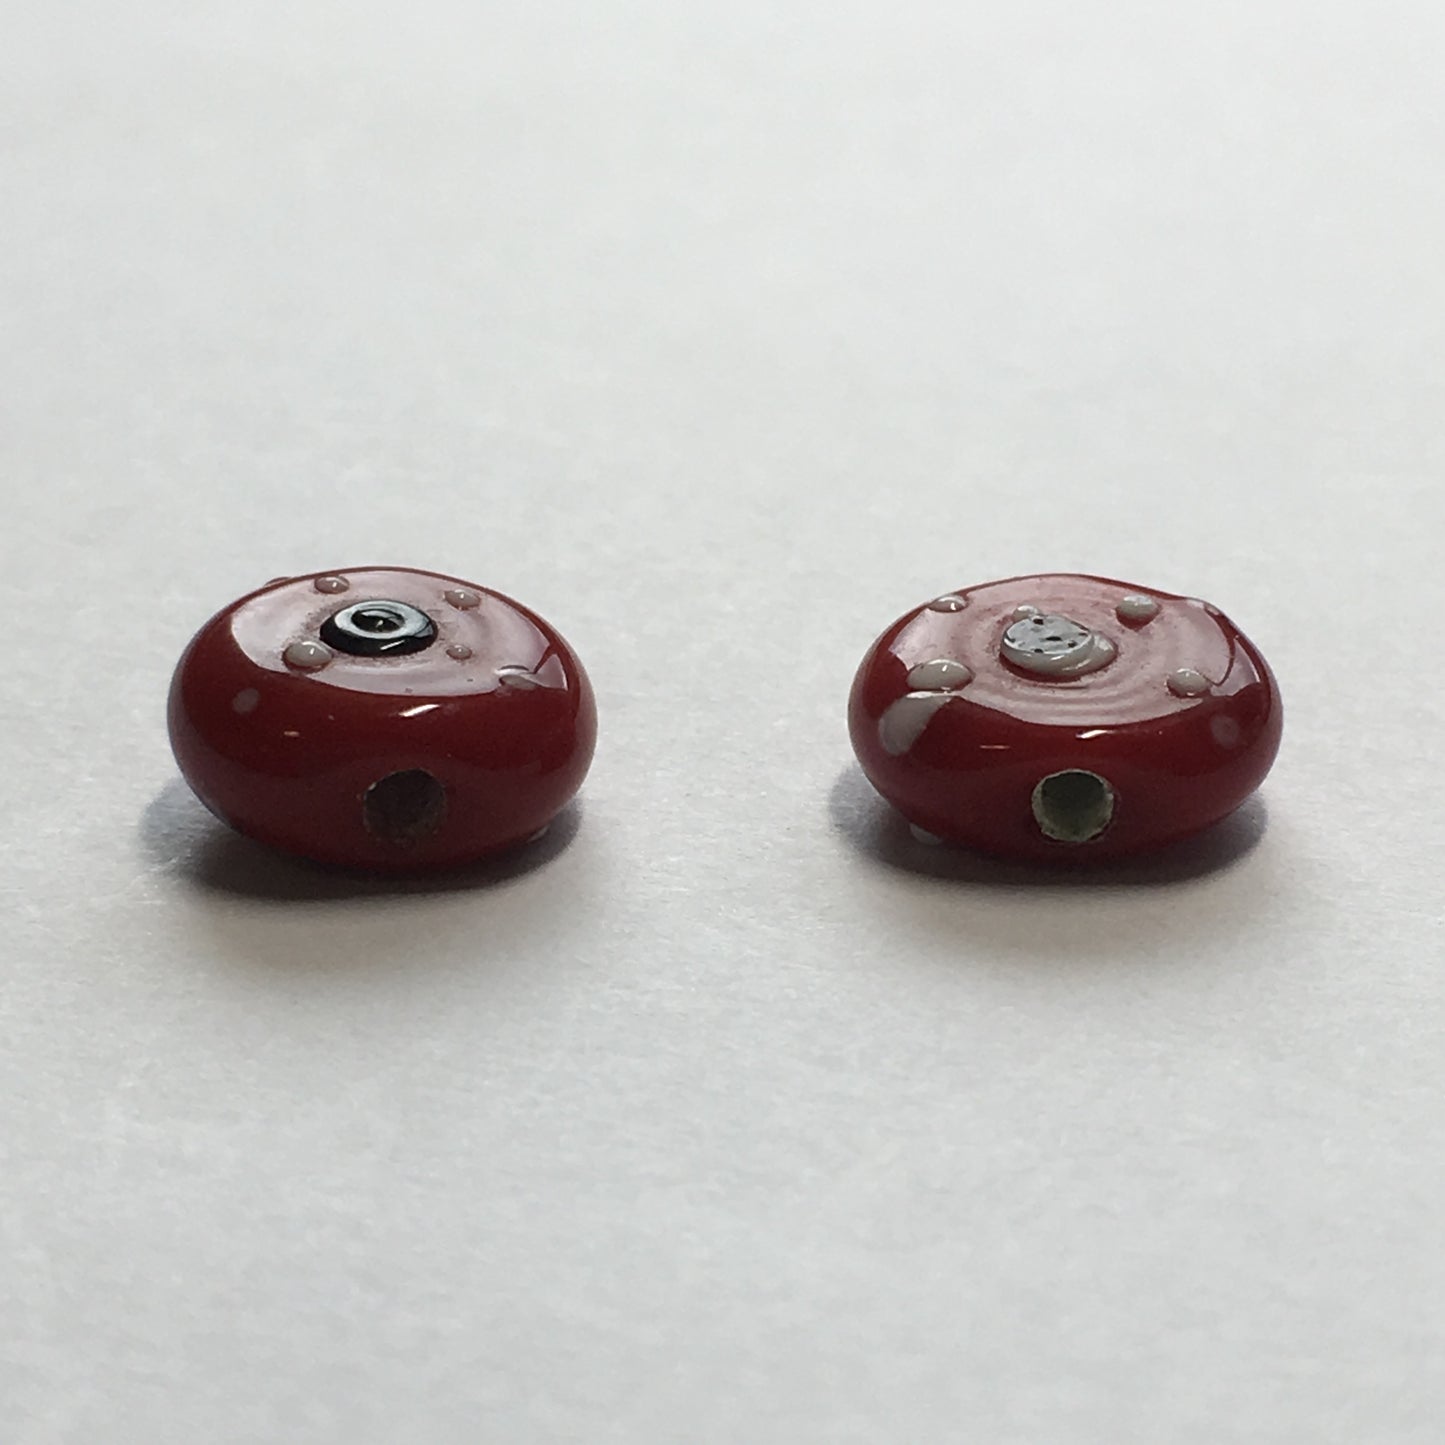 Opaque Red Lampwork Glass Coin Beads, 10 mm, 2 Beads